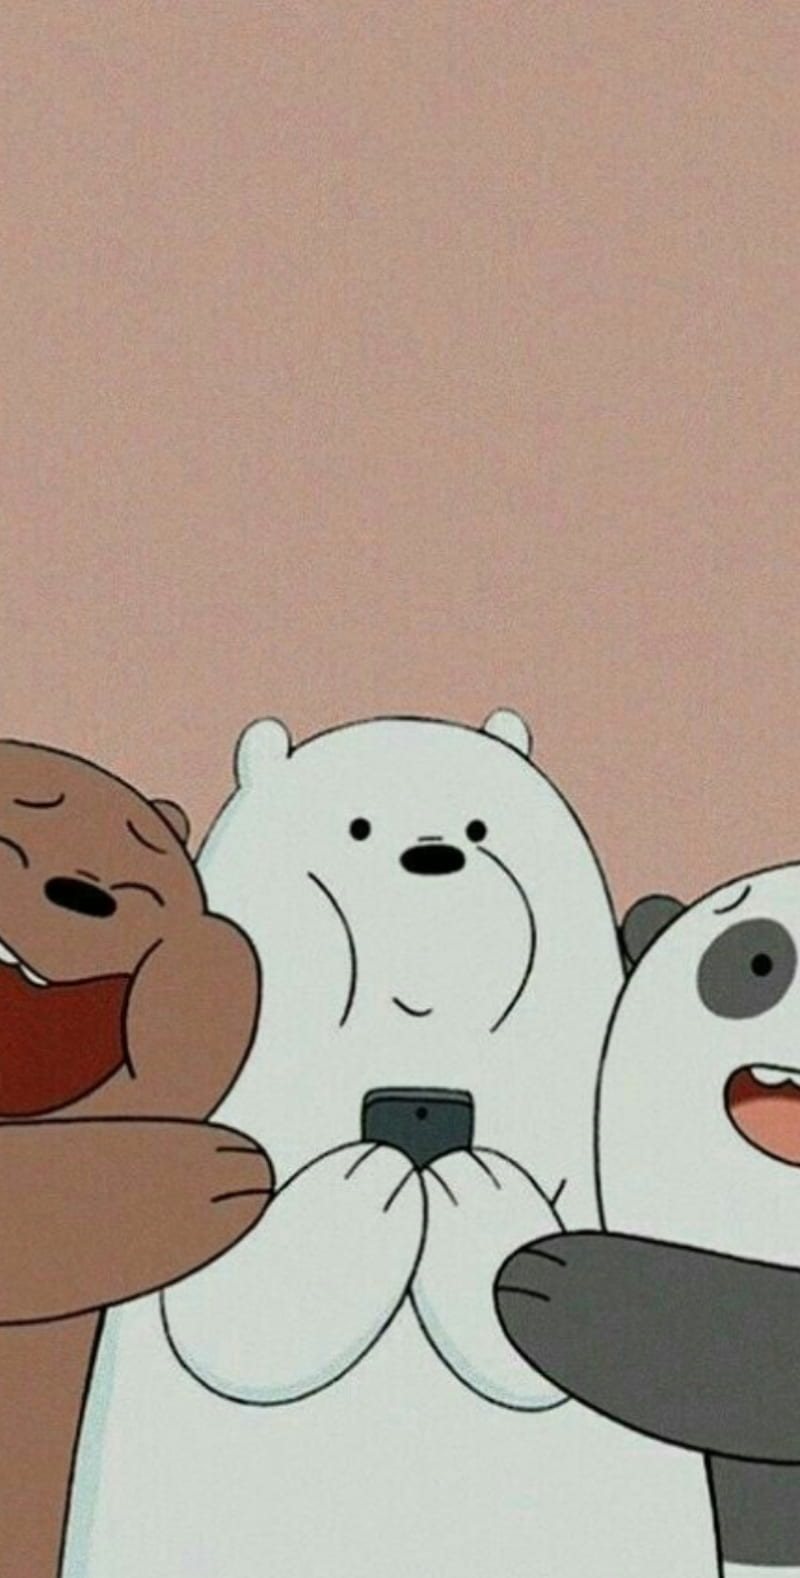 We bare bears wallpaper for iPhone and Android phone - We Bare Bears